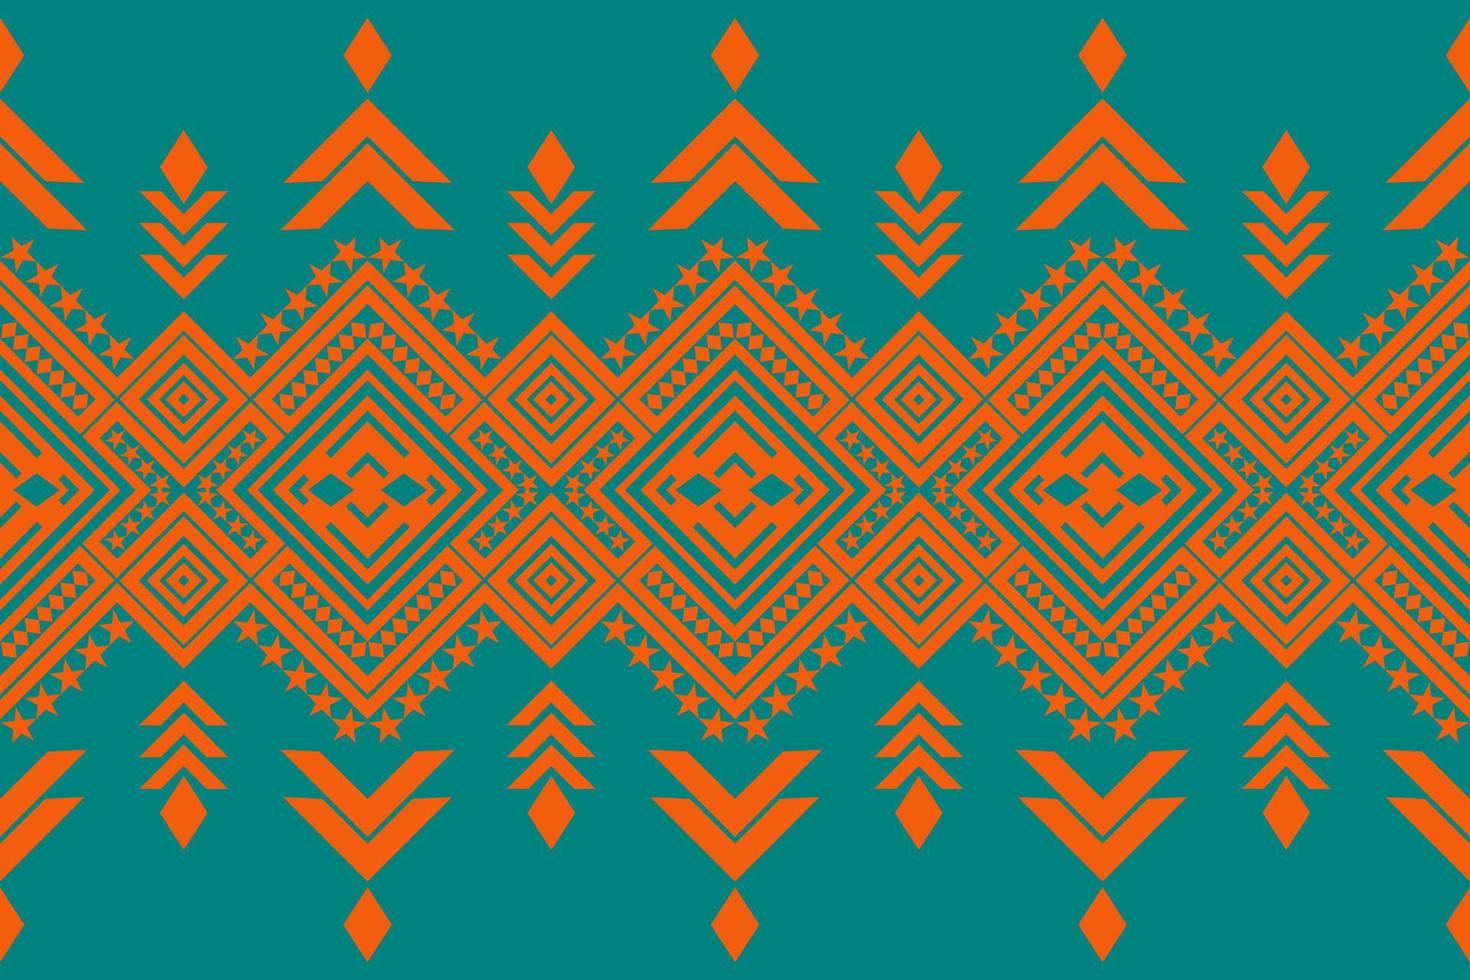 motif ethnic scandinavian for printing on fabric ,Other products on demand vector